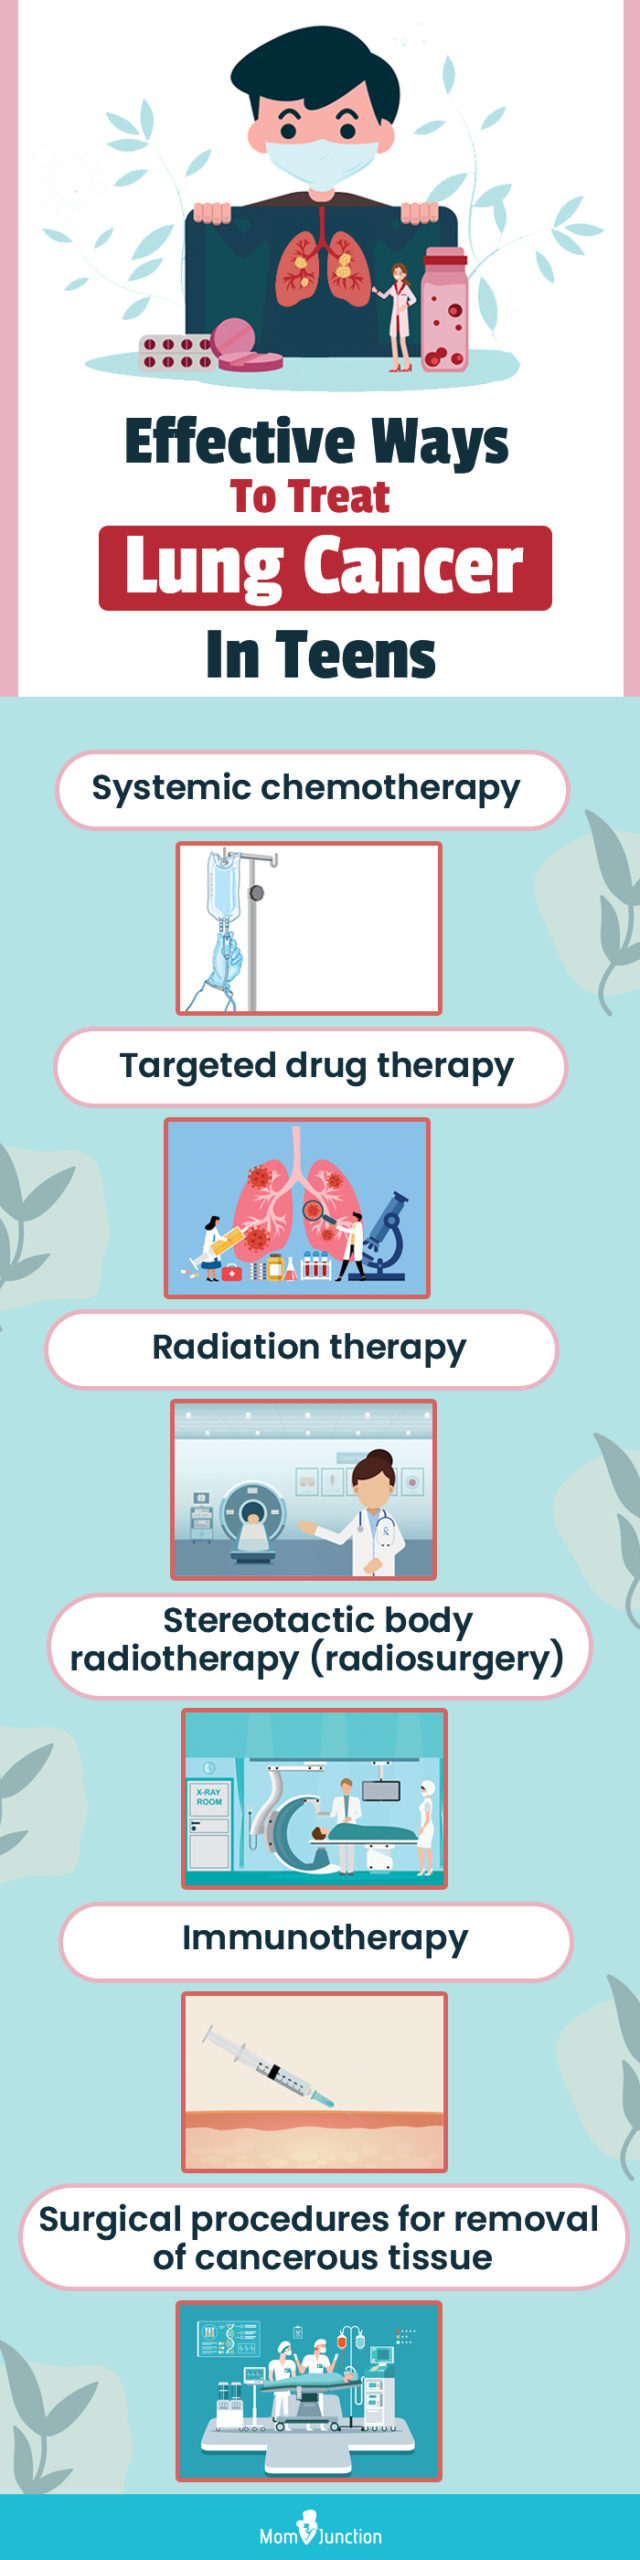 effective ways to treat lung cancer in teens (infographic)